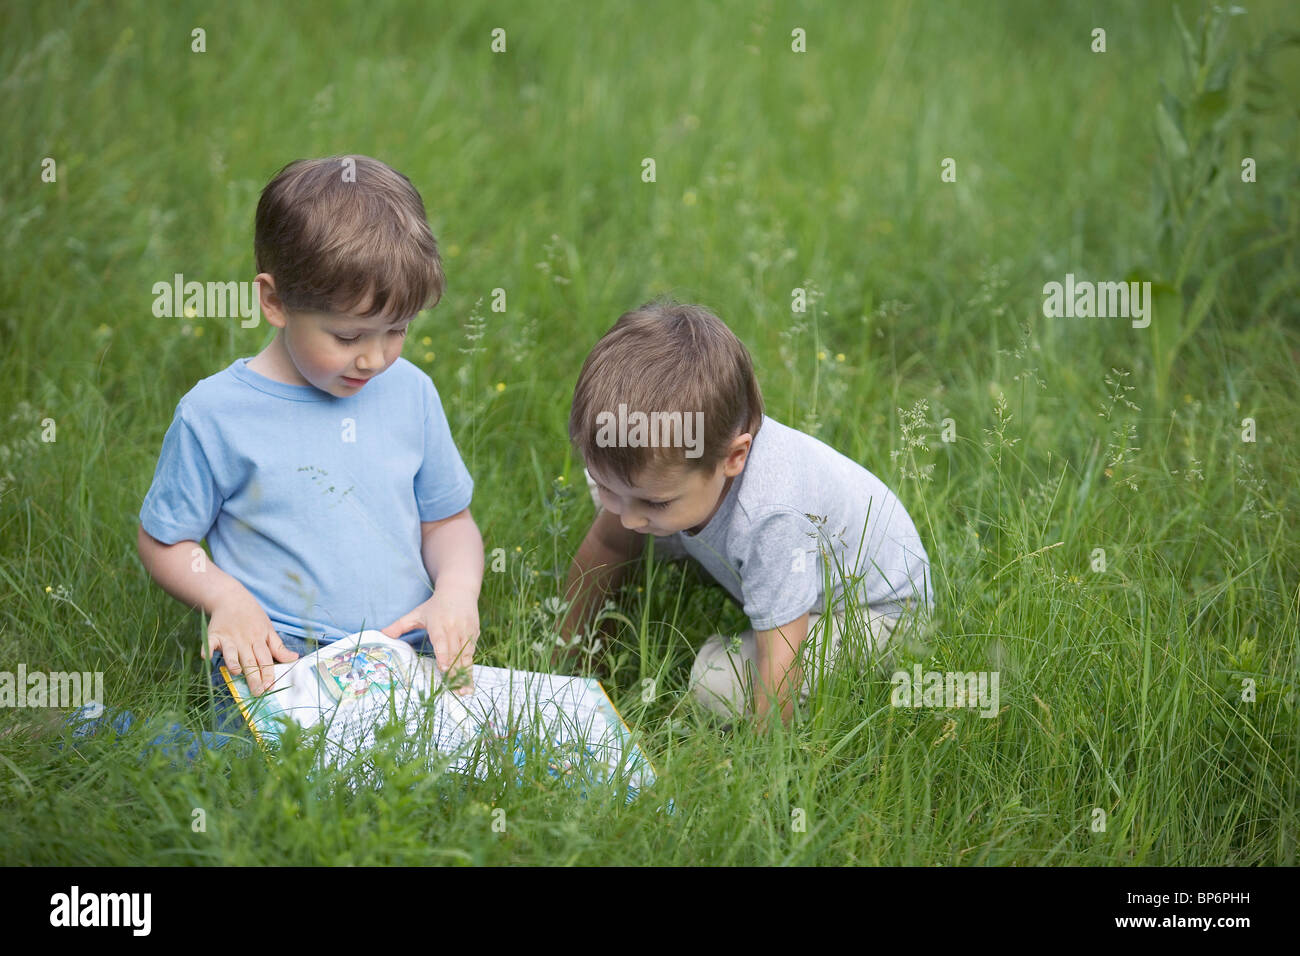 Two boys looking at a book in a field Stock Photo